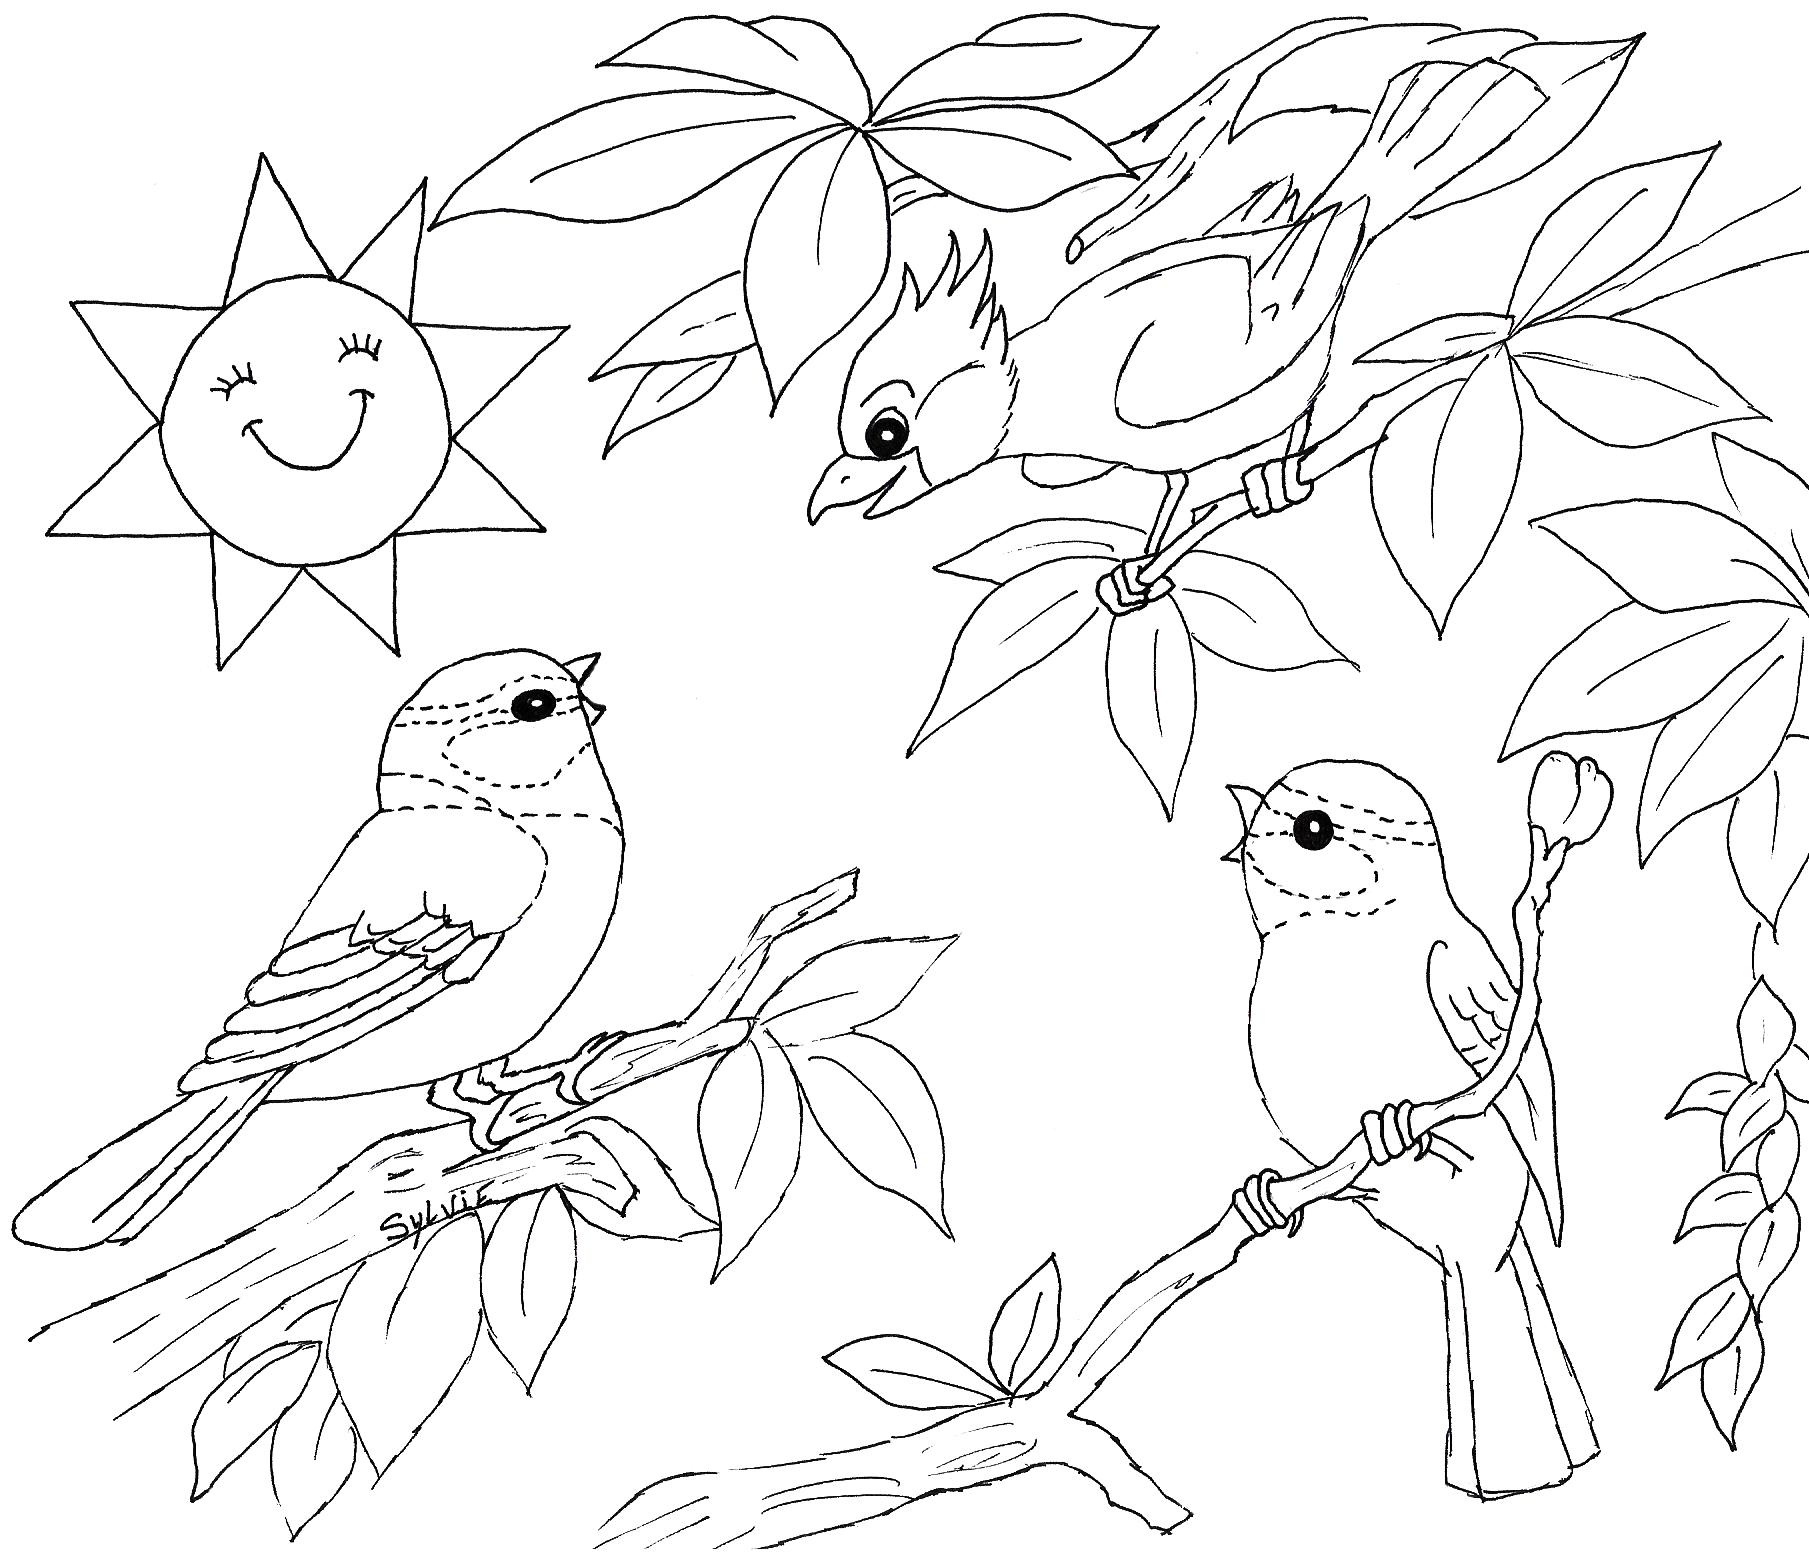 Funny Birds coloring page for children